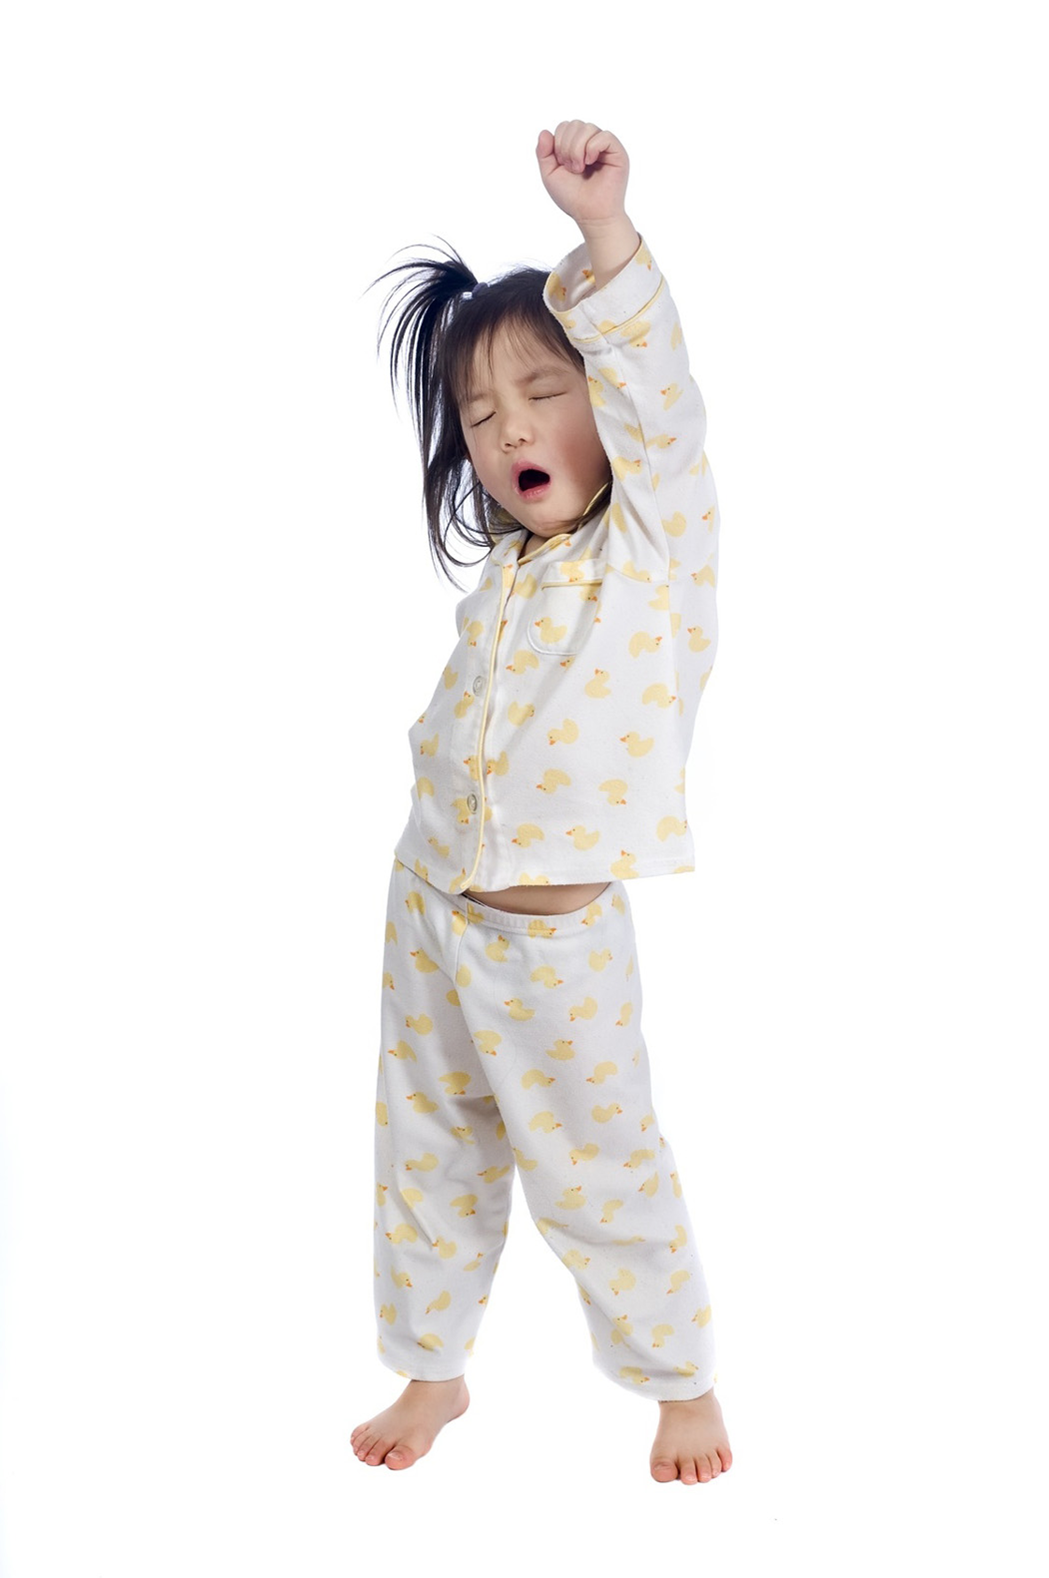 50% off for all pajamas! Cott